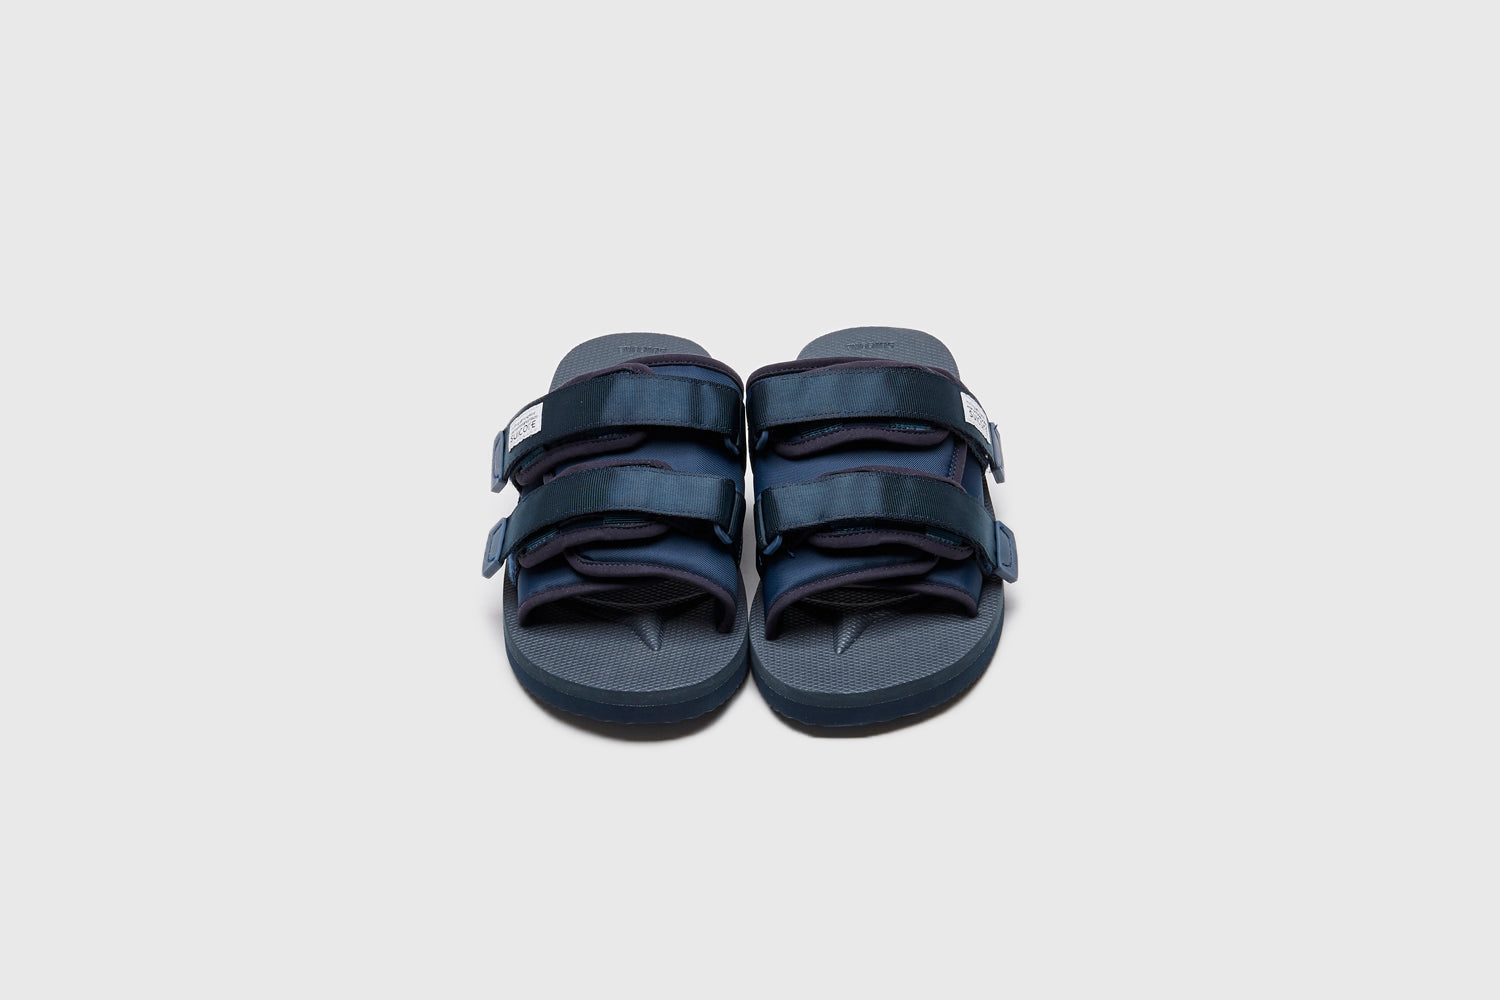 SUICOKE MOTO-Cab slides with navy nylon upper, navy midsole and sole, straps and logo patch. From Spring/Summer 2023 collection on eightywingold Web Store, an official partner of SUICOKE. OG-056CAB NAVY